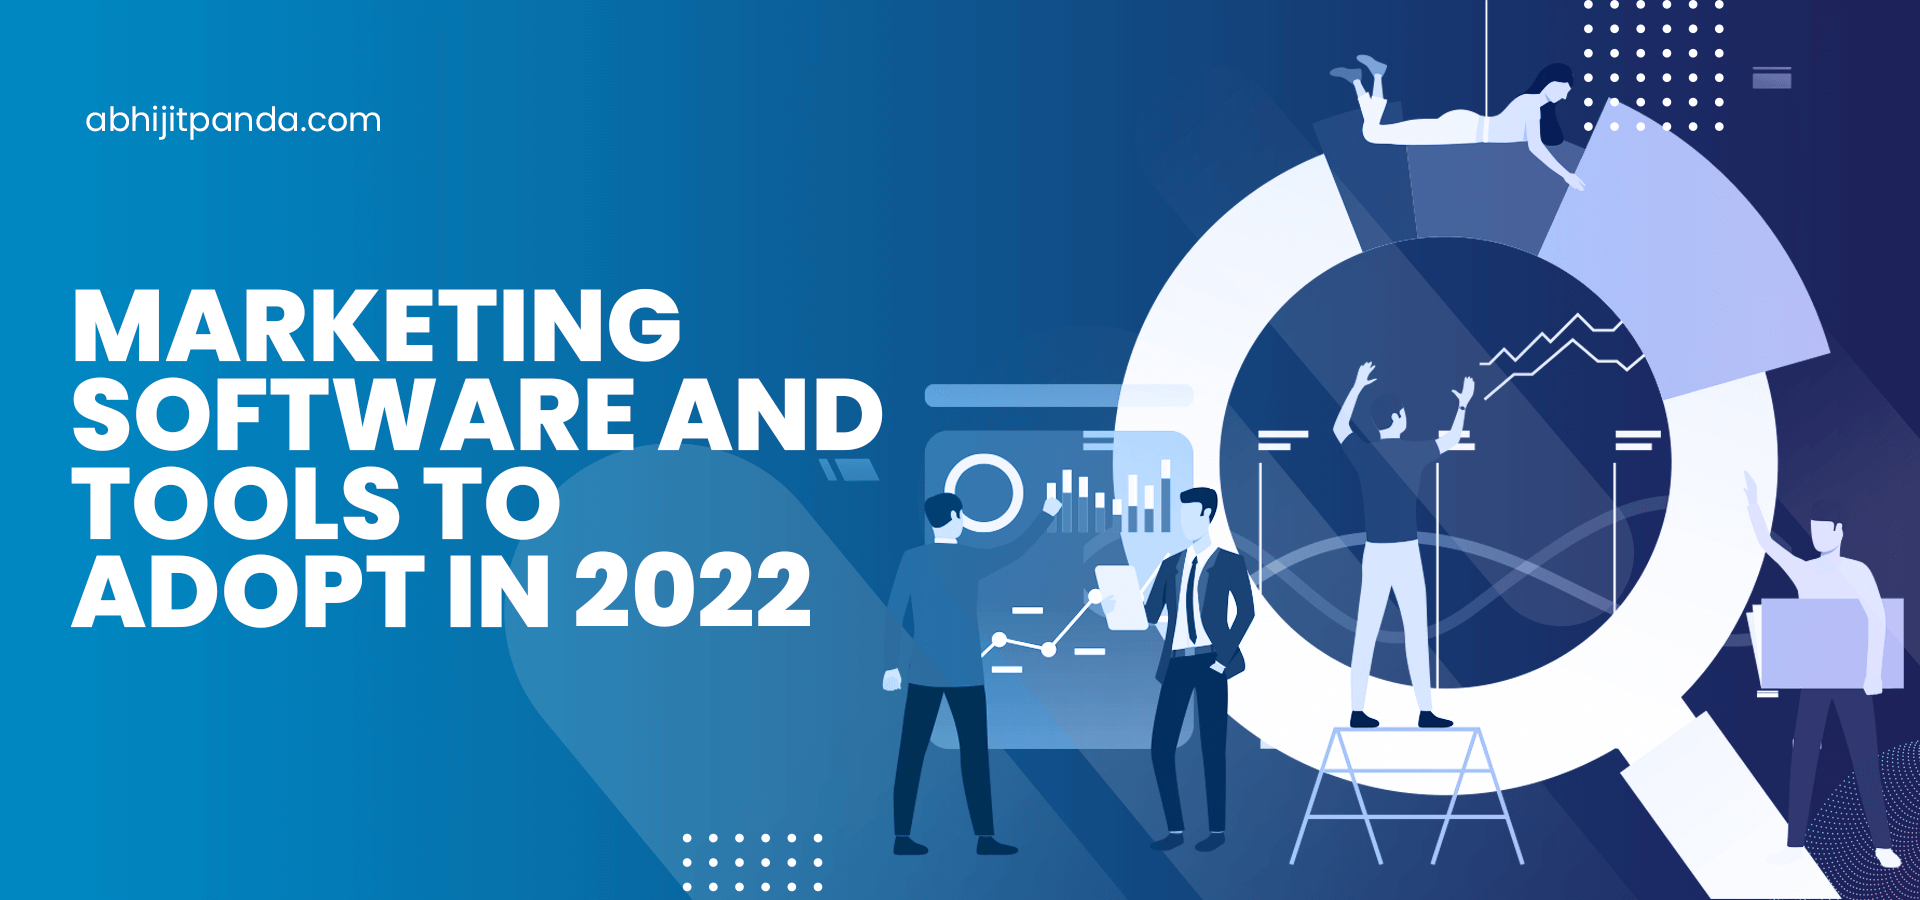 Marketing Software and Tools to Adopt in 2022